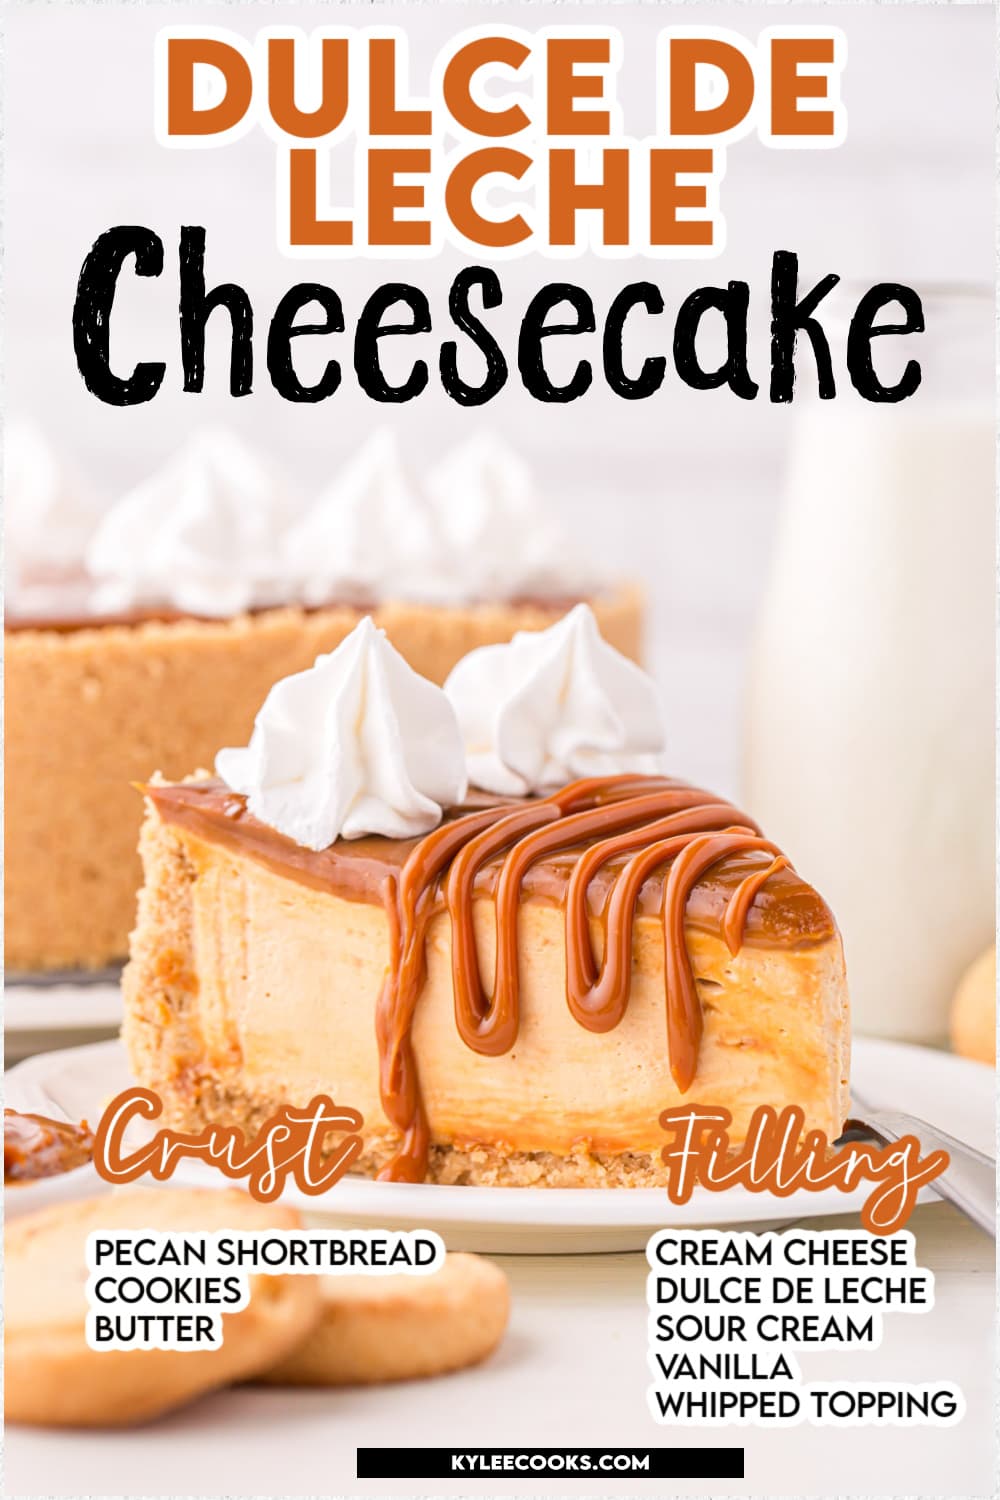 dulce de leche cheesecake with recipe name and ingredients overlaid in text and images.